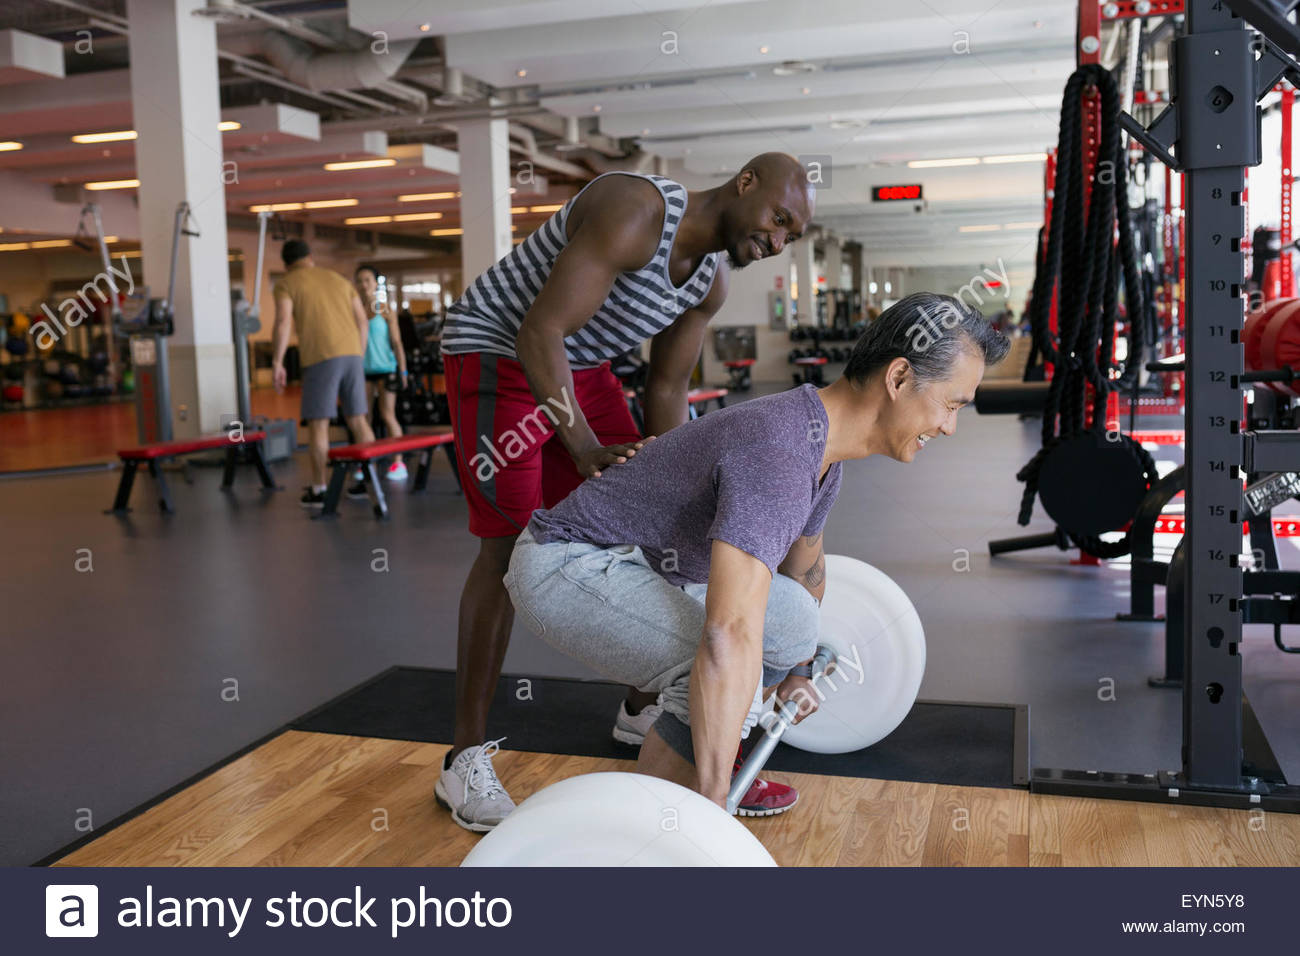 Personal trainer spotting man doing barbell deadlift gym Stock Photo